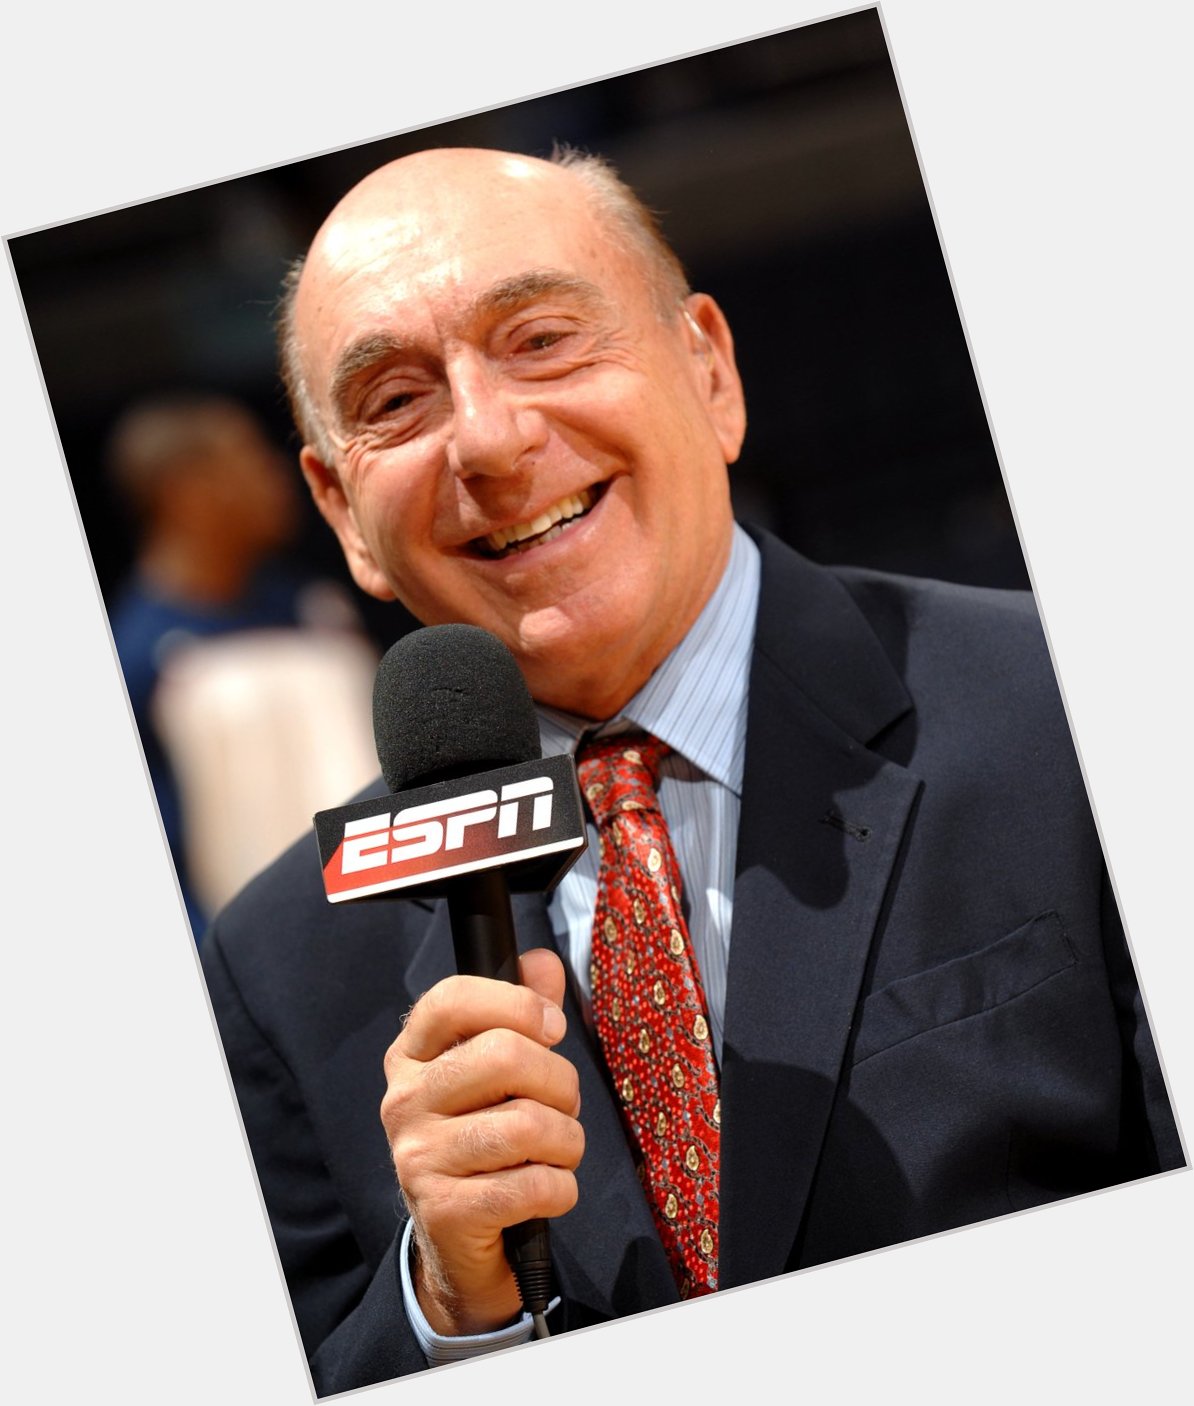 A big birthday shoutout to No one lives life better than Dick Vitale. Happy Birthday my man!! 